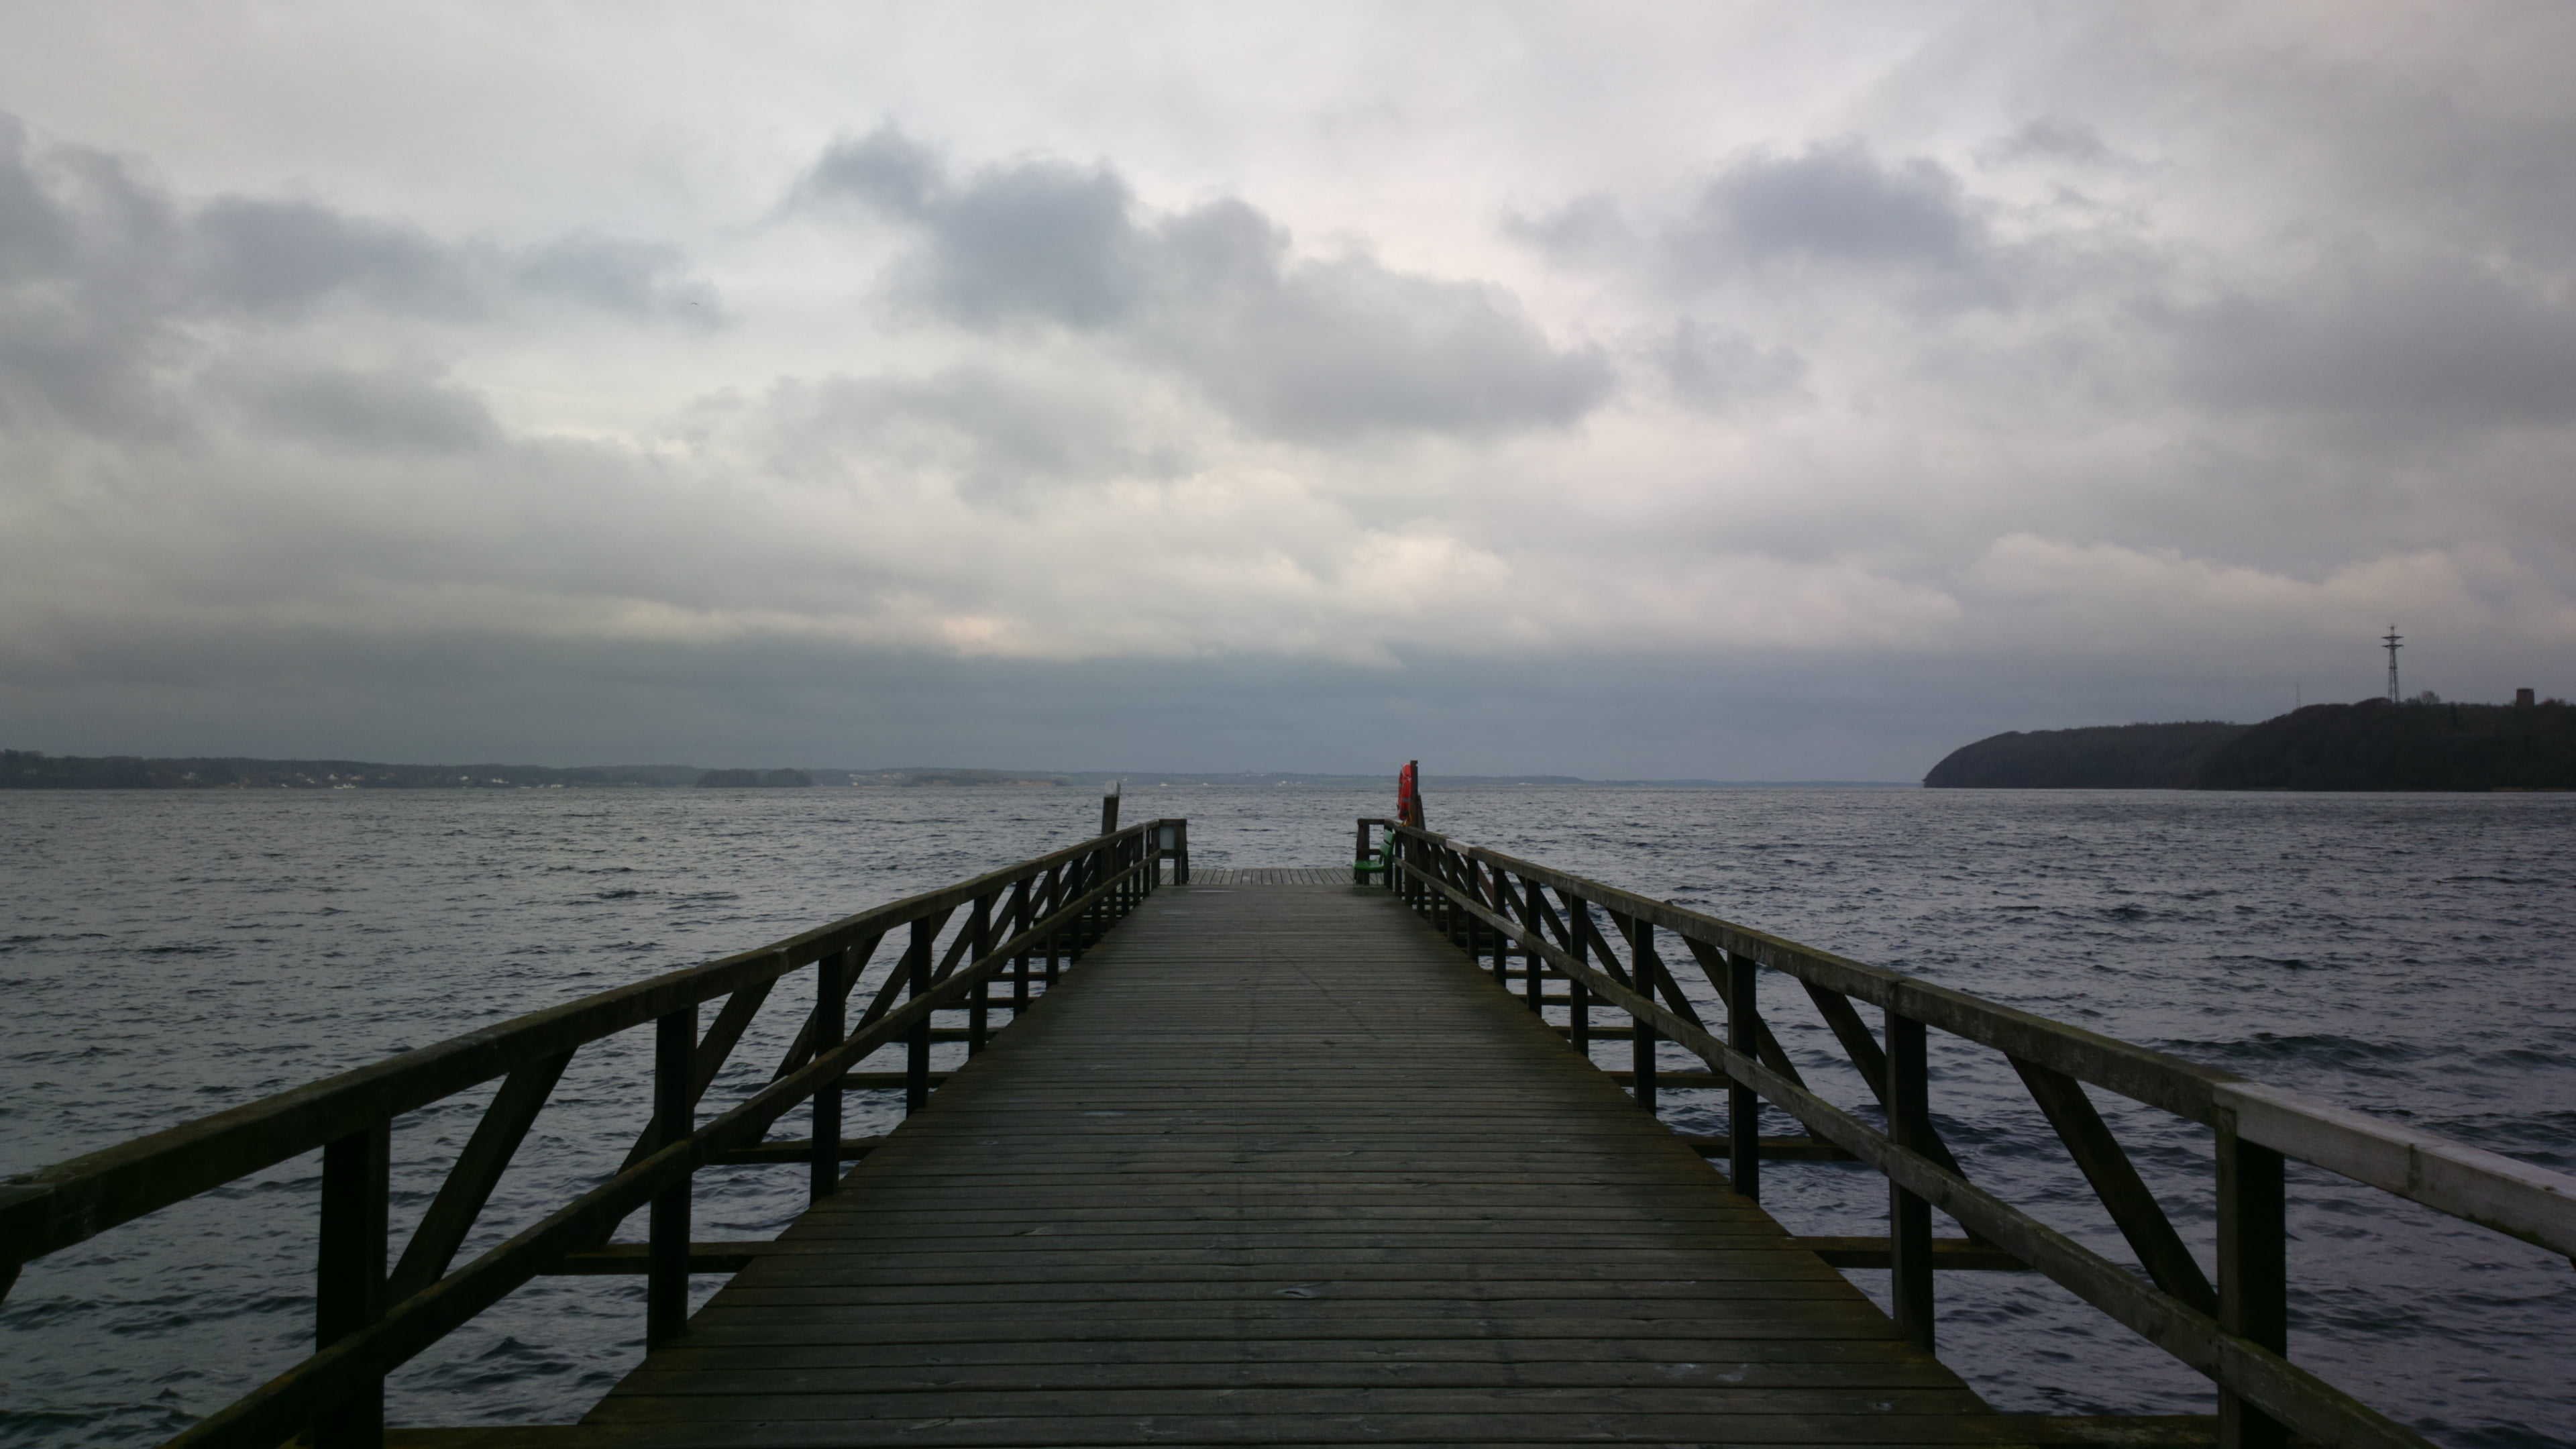 person taking photo of gray wooden dock under gray clouds, Nokia  808  Pureview